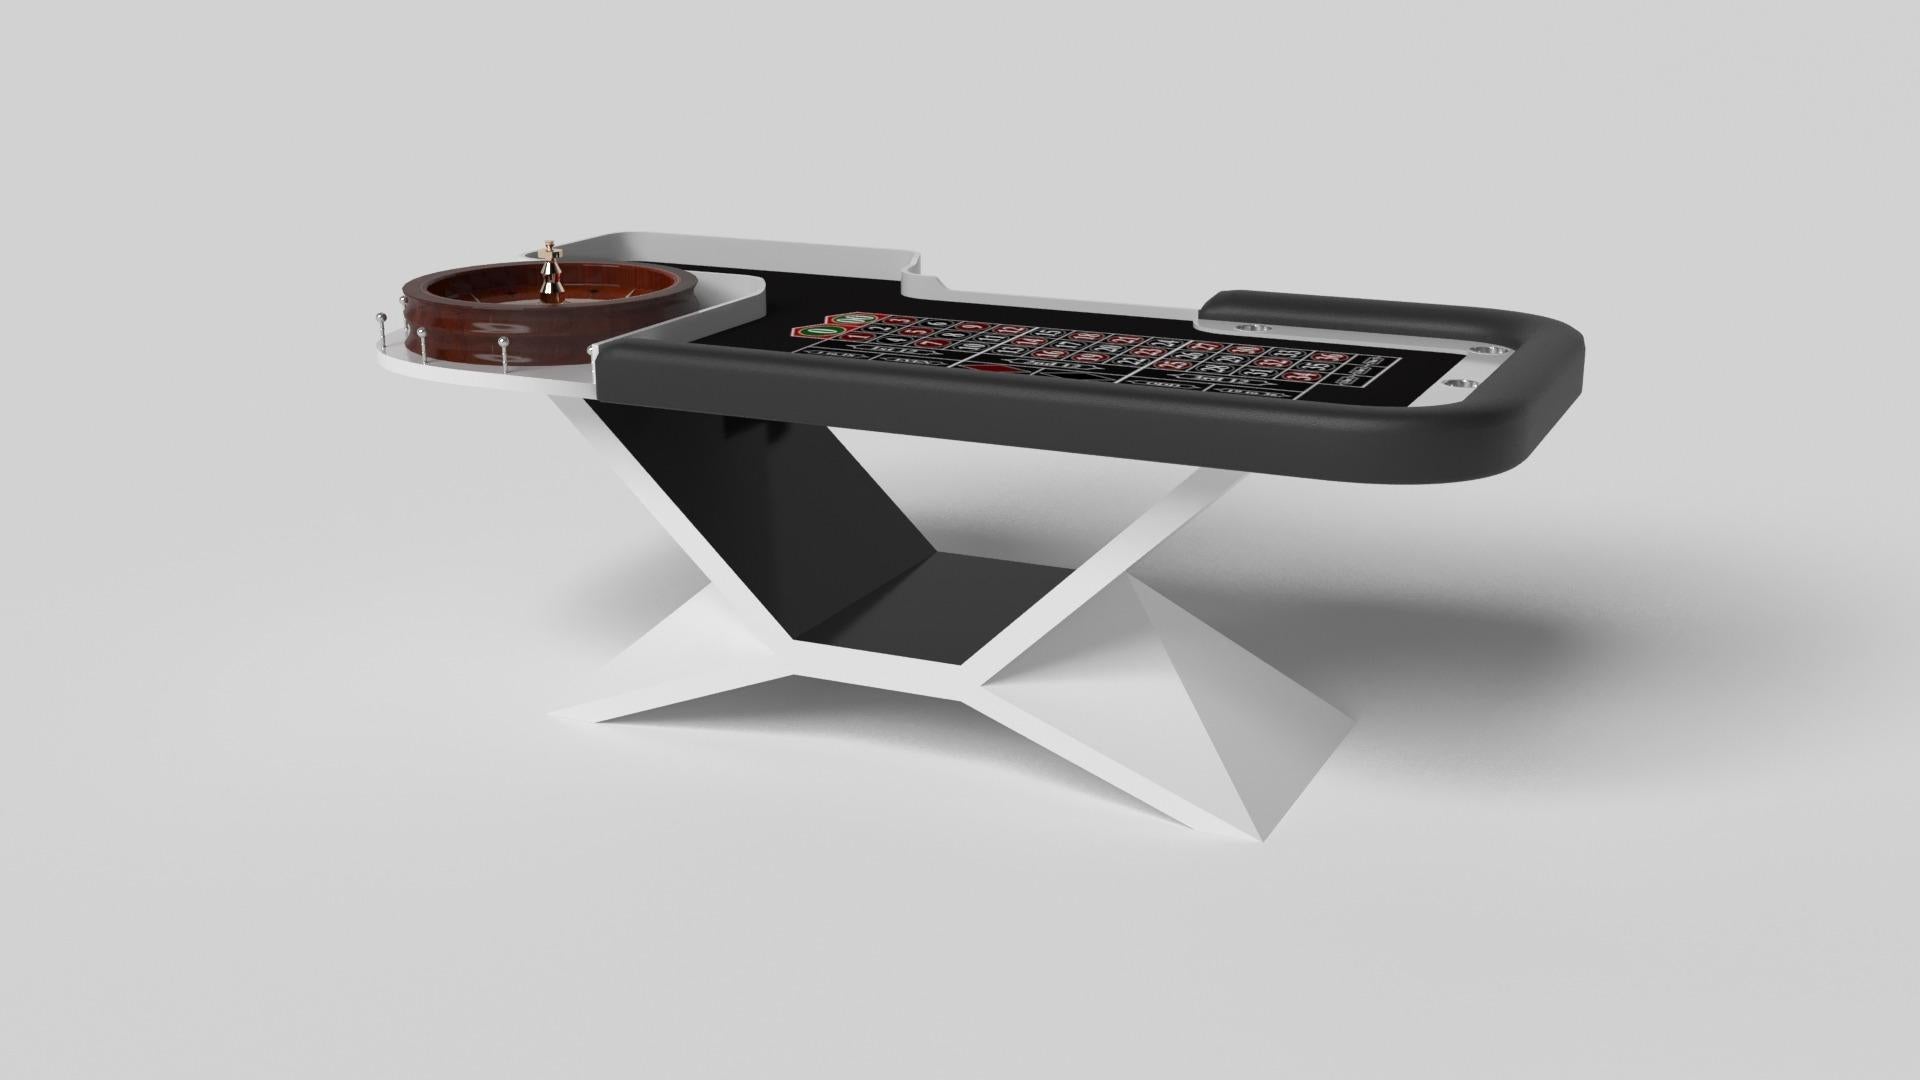 In chrome metal, the Kors roulette table is a superior example of contrasting geometric forms. This table features an angular base that highlights the beauty of negative space from the front view. From the side view, it offers a completely different